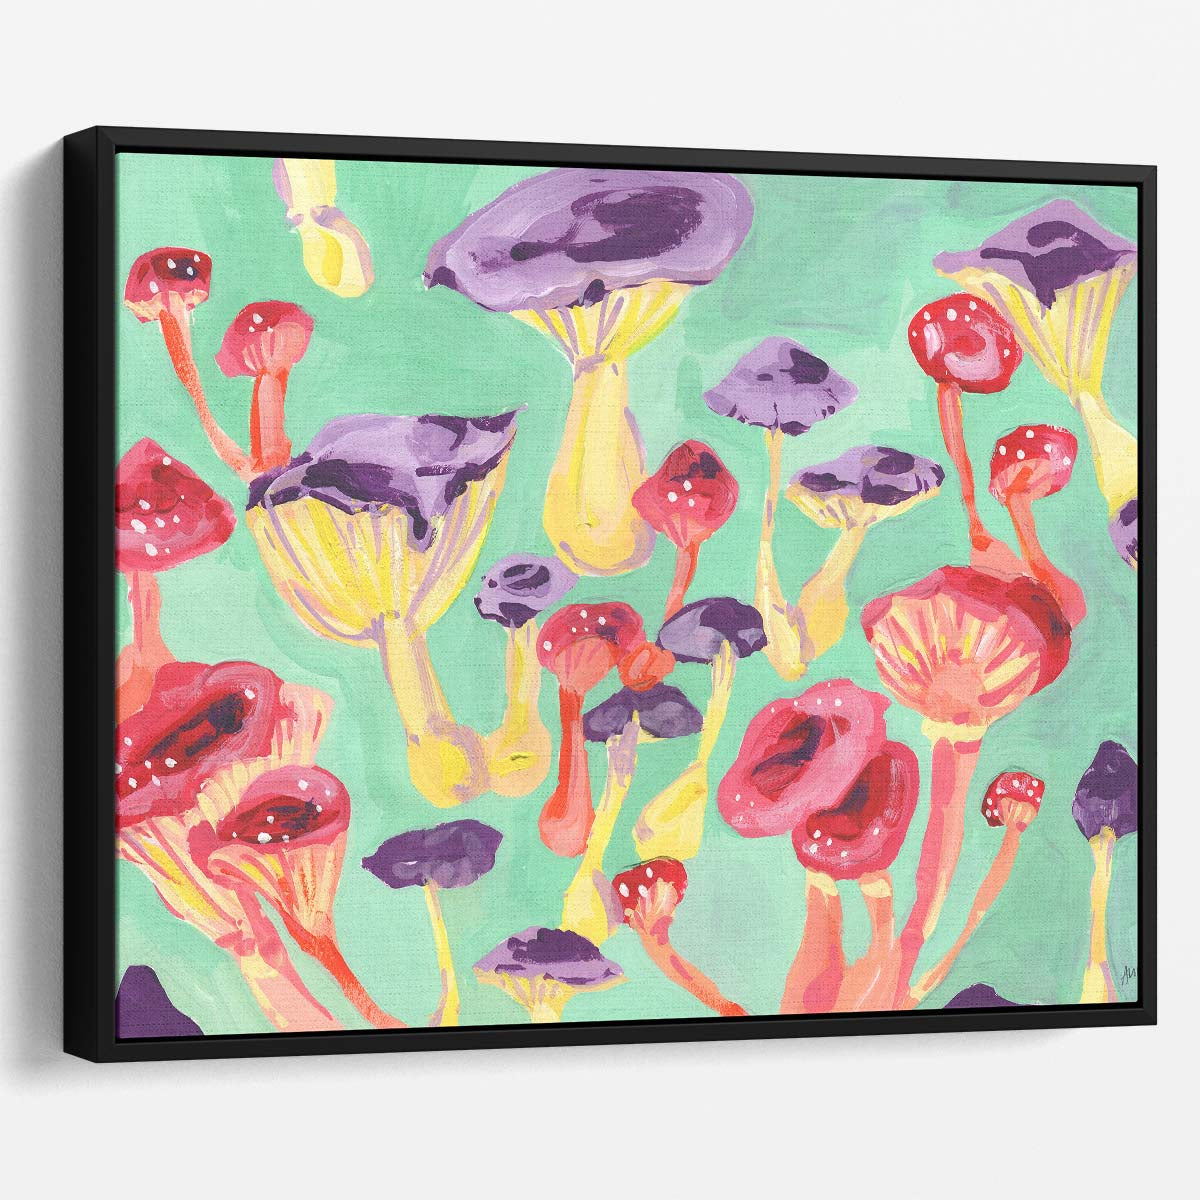 Enchanted Forest Mushrooms Bold Gouache Landscape Wall Art by Luxuriance Designs. Made in USA.